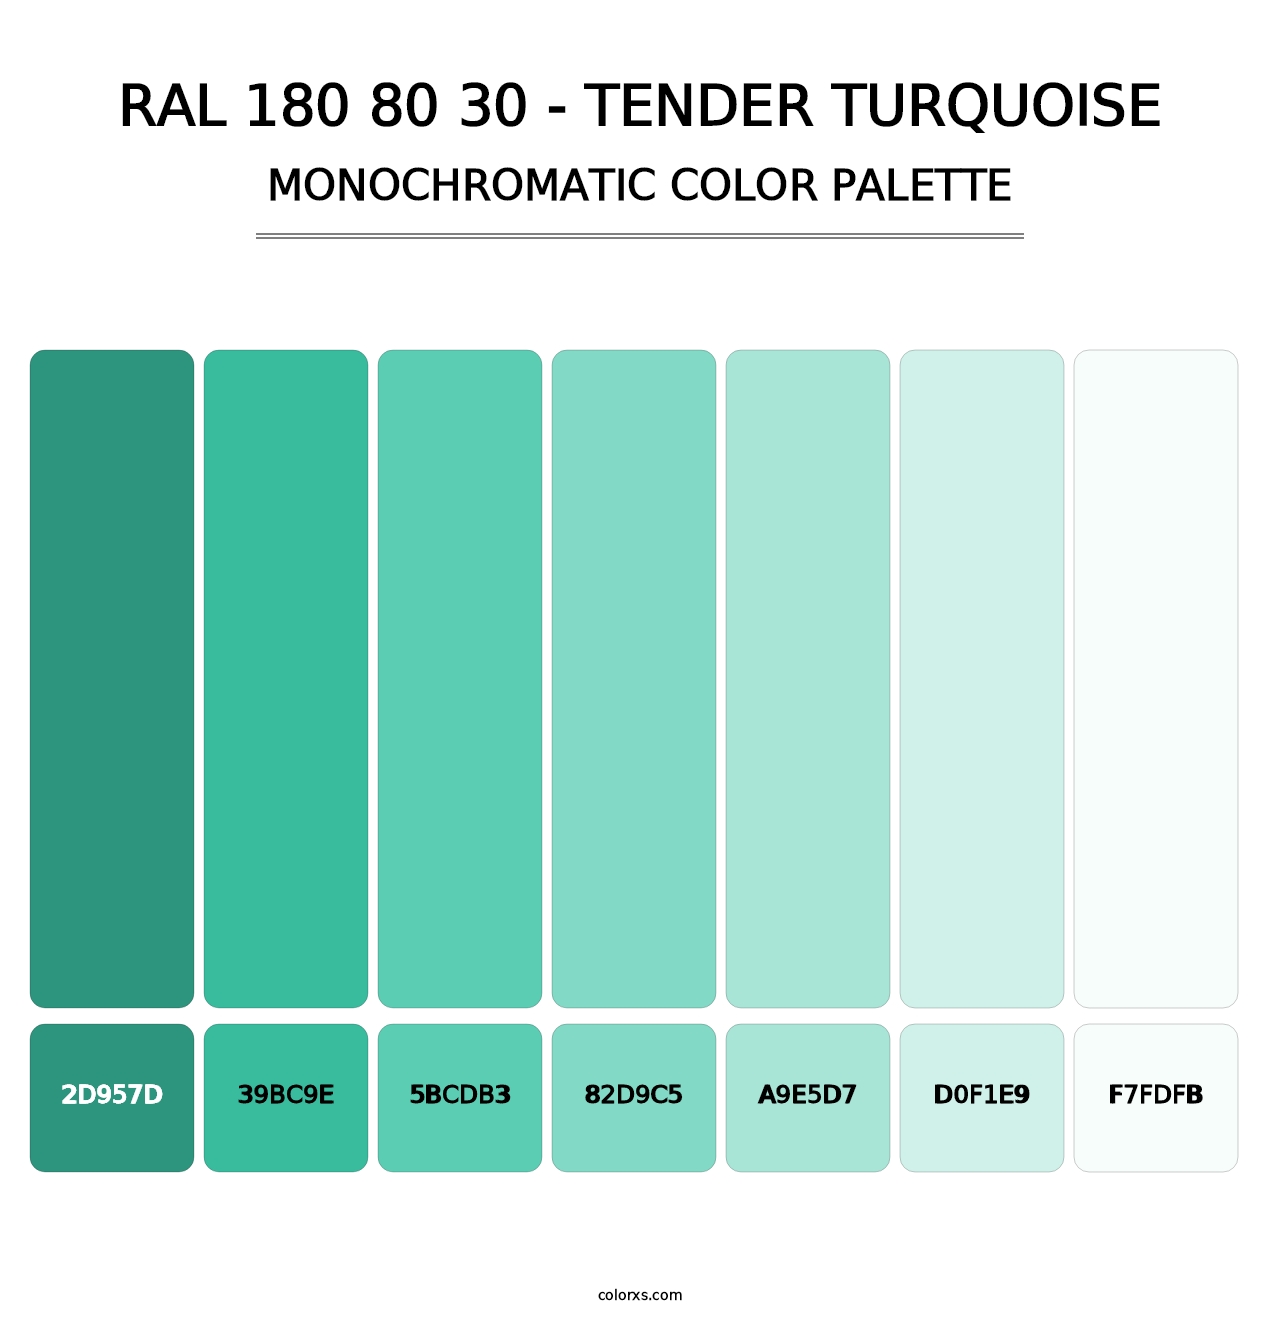 RAL 180 80 30 - Tender Turquoise - Monochromatic Color Palette